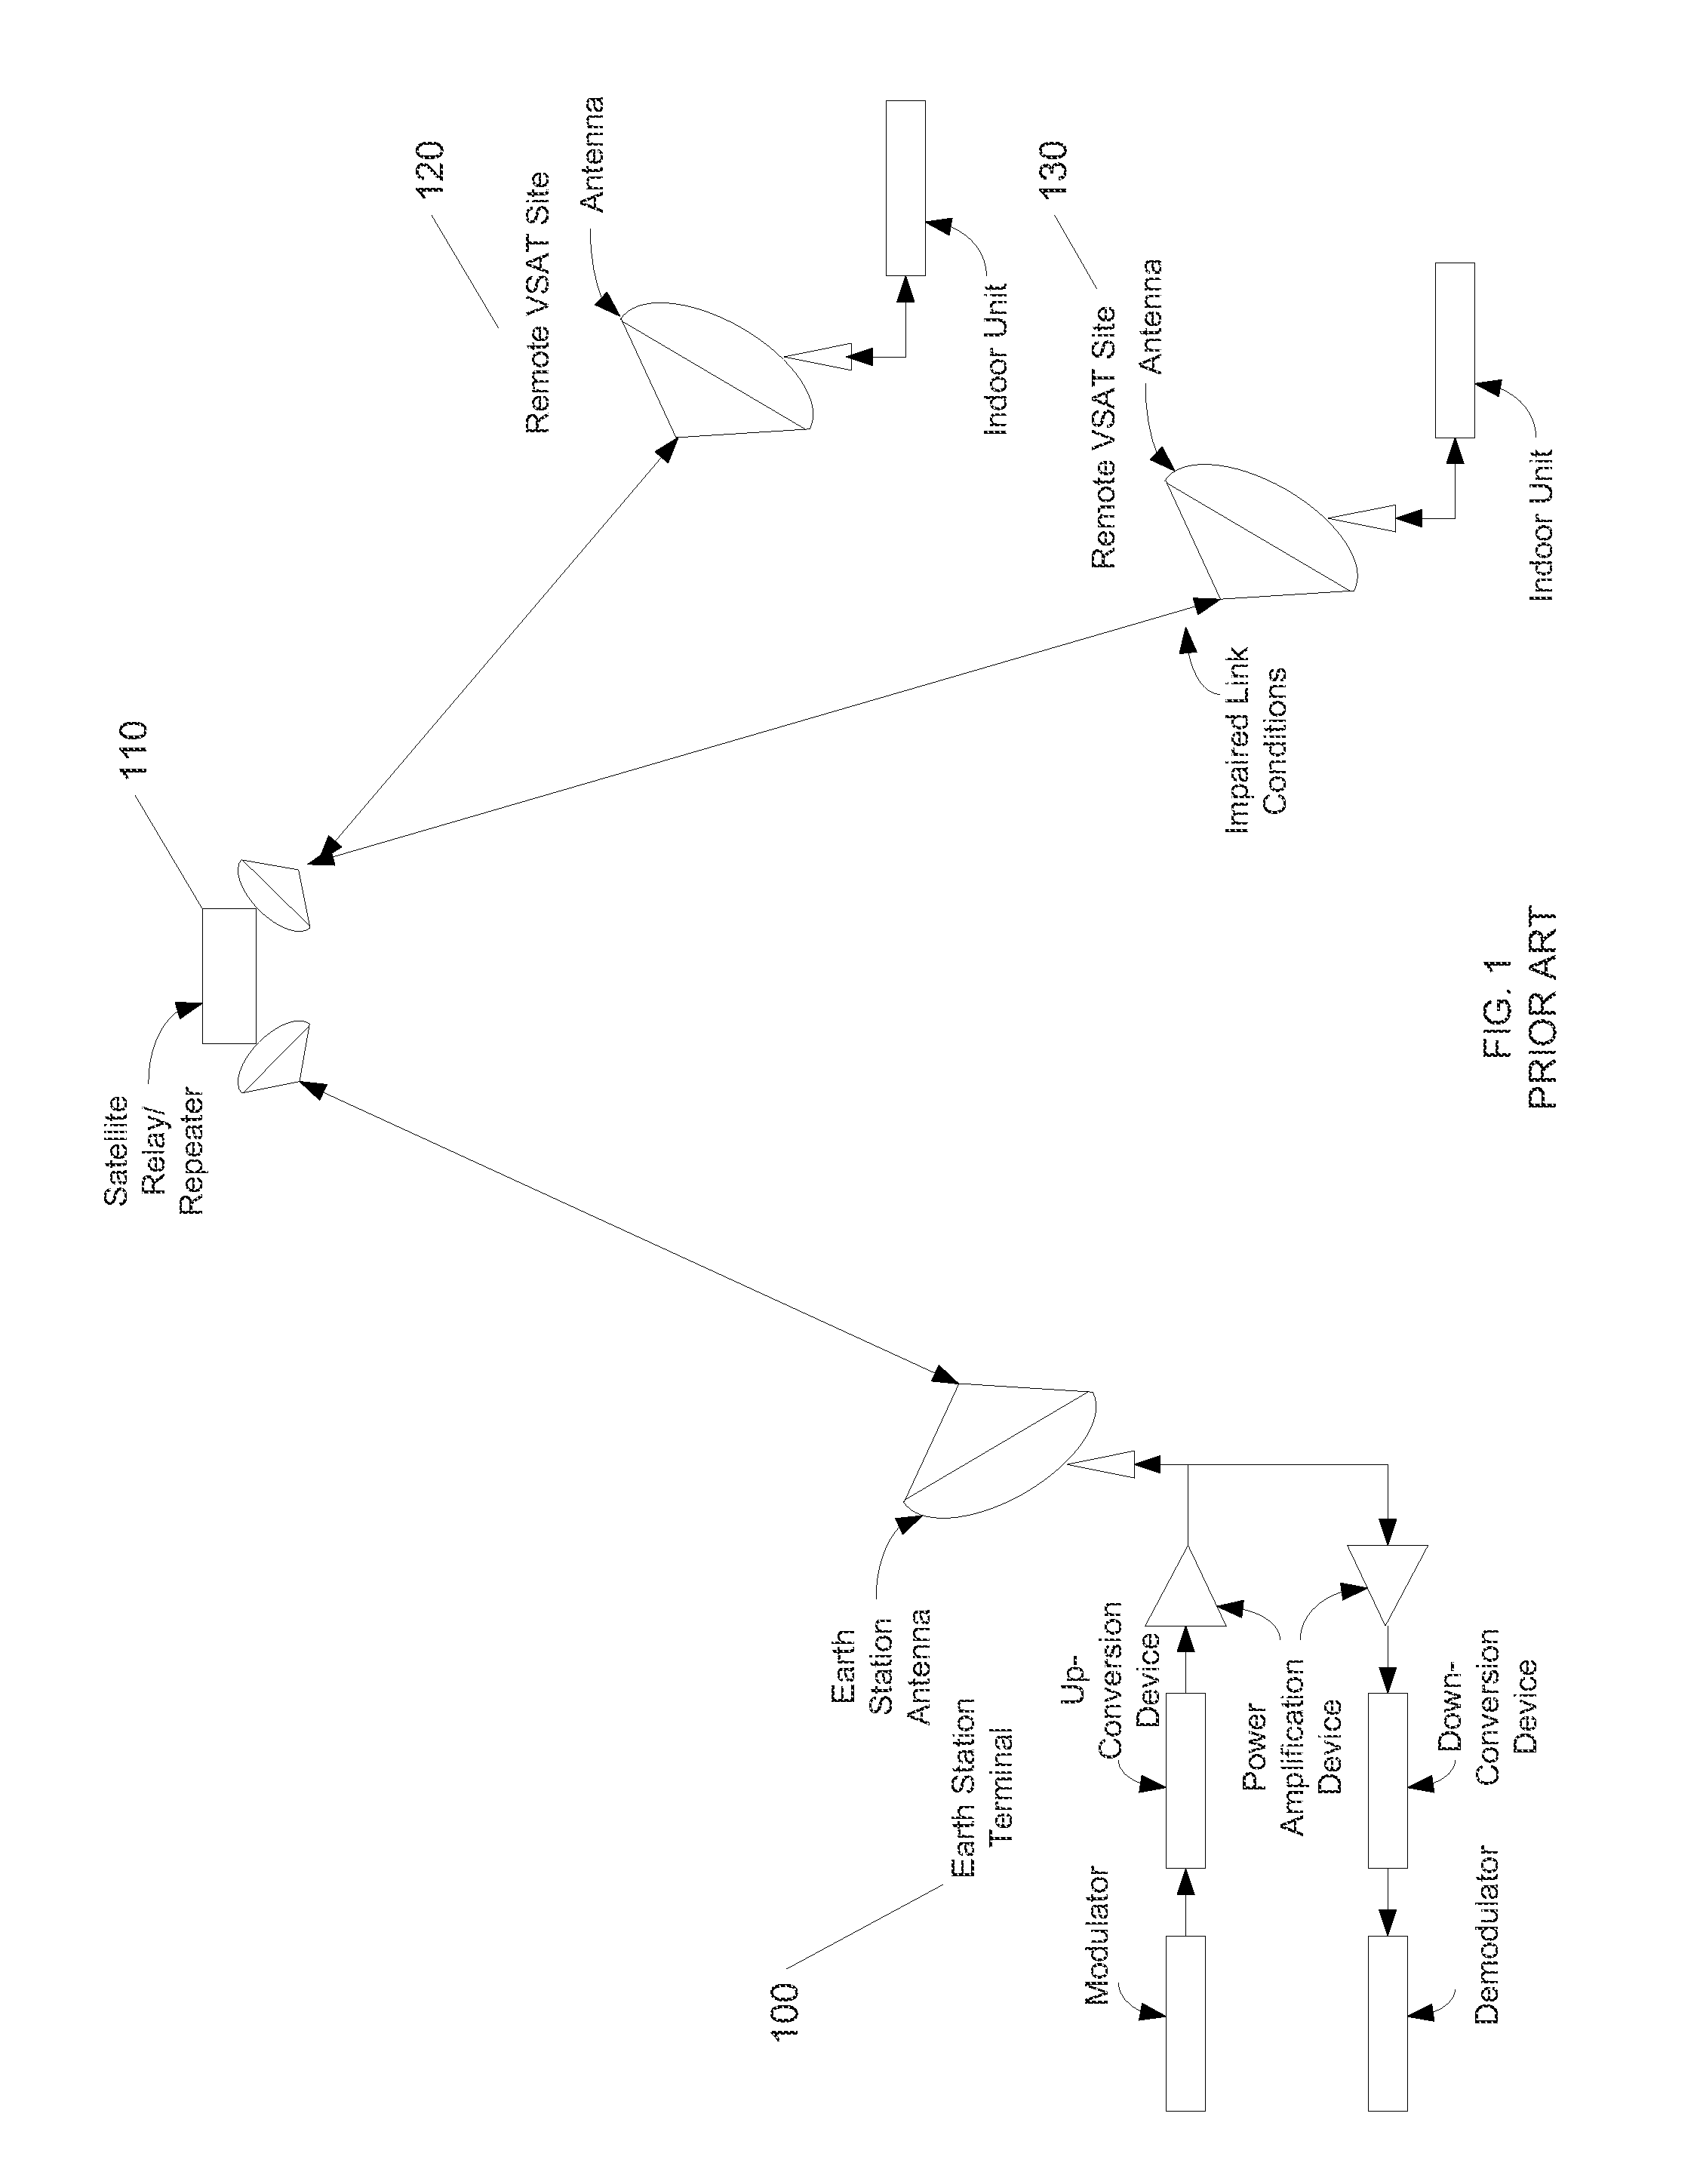 Method and System for Optimizing Performance with Hitless Switching for Fixed Symbol Rate Carriers Using Closed-Loop Power Control while Maintaining Power Equivalent Bandwidth (PEB)